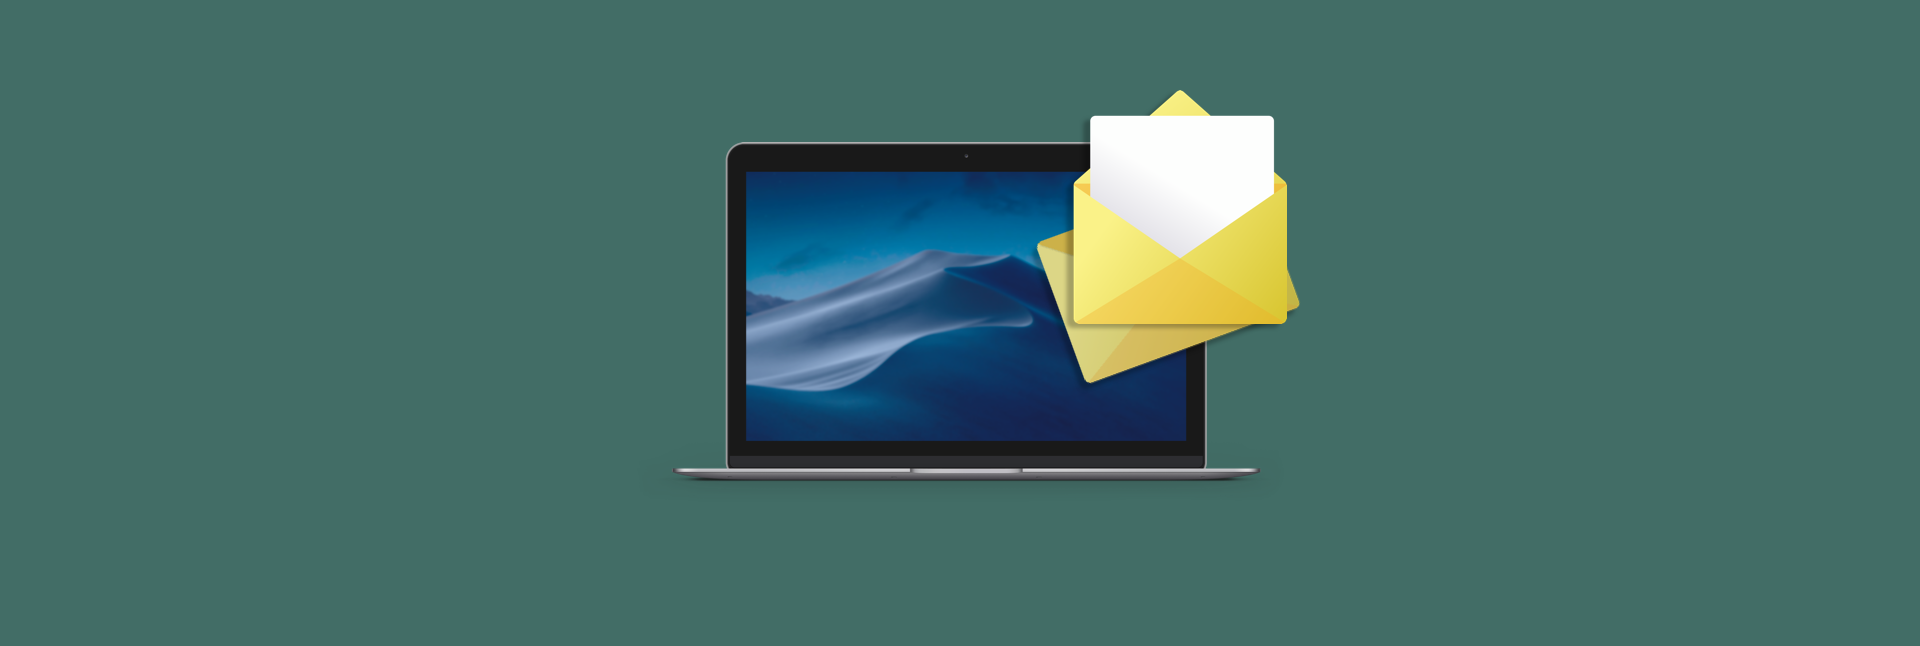 best email software for mac os